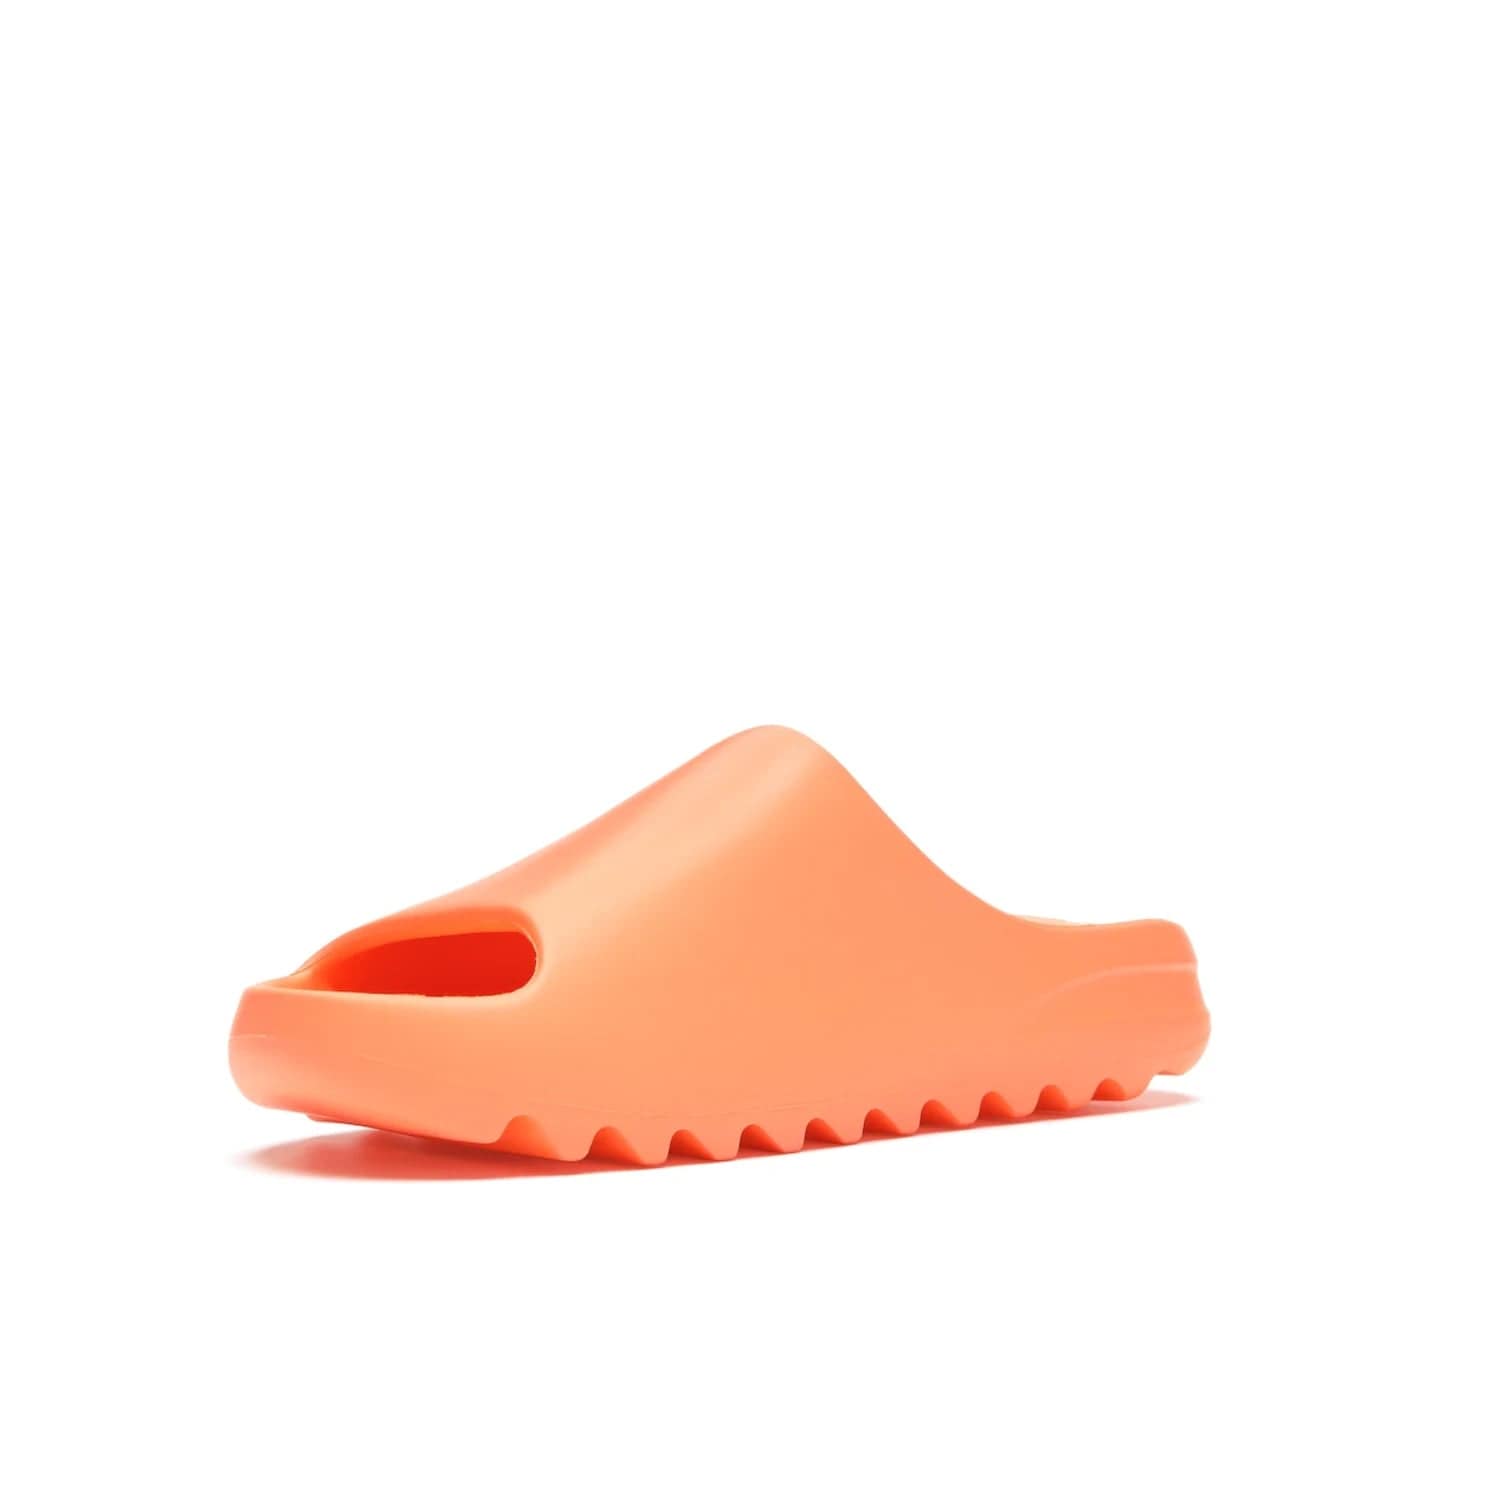 adidas Yeezy Slide Enflame Orange - Image 15 - Only at www.BallersClubKickz.com - Limited edition adidas Yeezy Slide featuring a bold Enflame Orange upper and EVA foam construction. Grooved outsole for traction and support. Released June 2021. Perfect for summer.